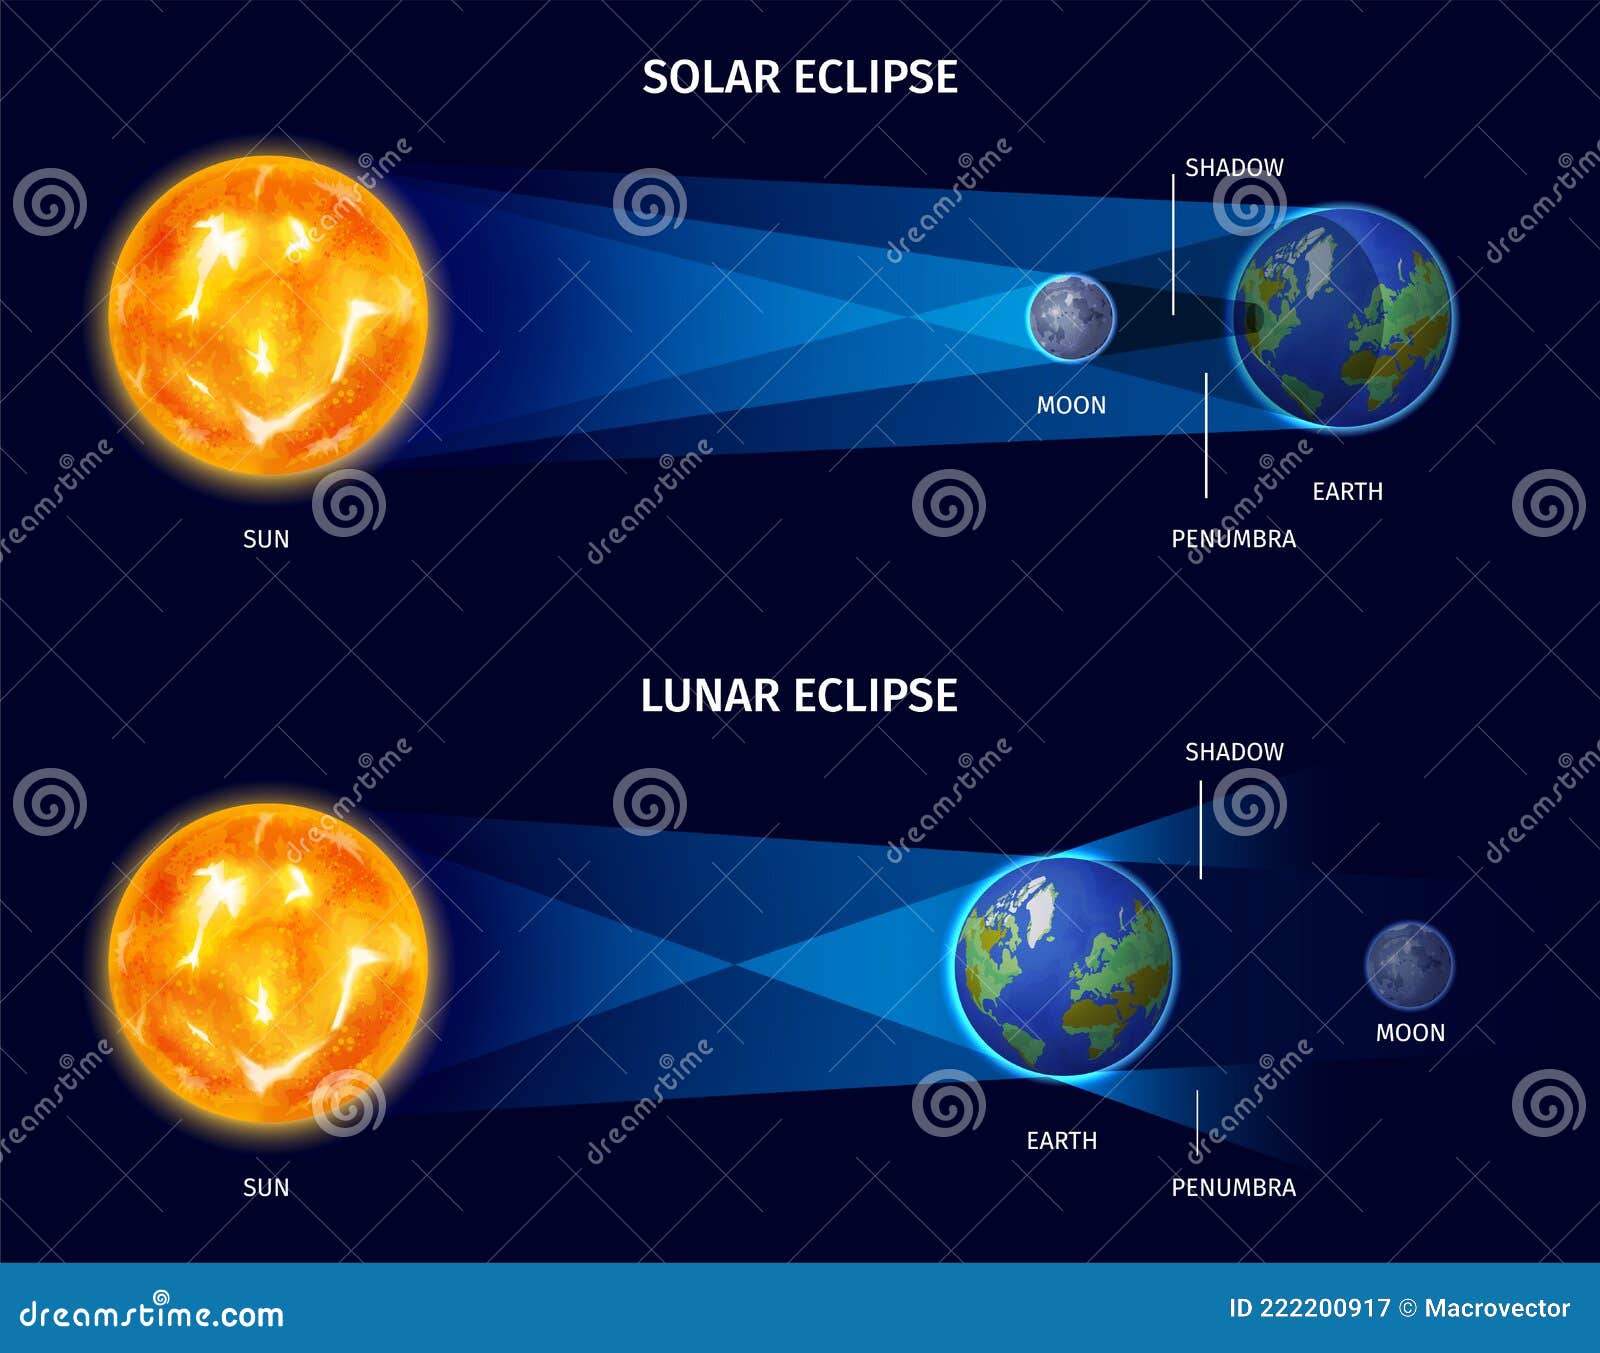 solar and lunar eclipse poster